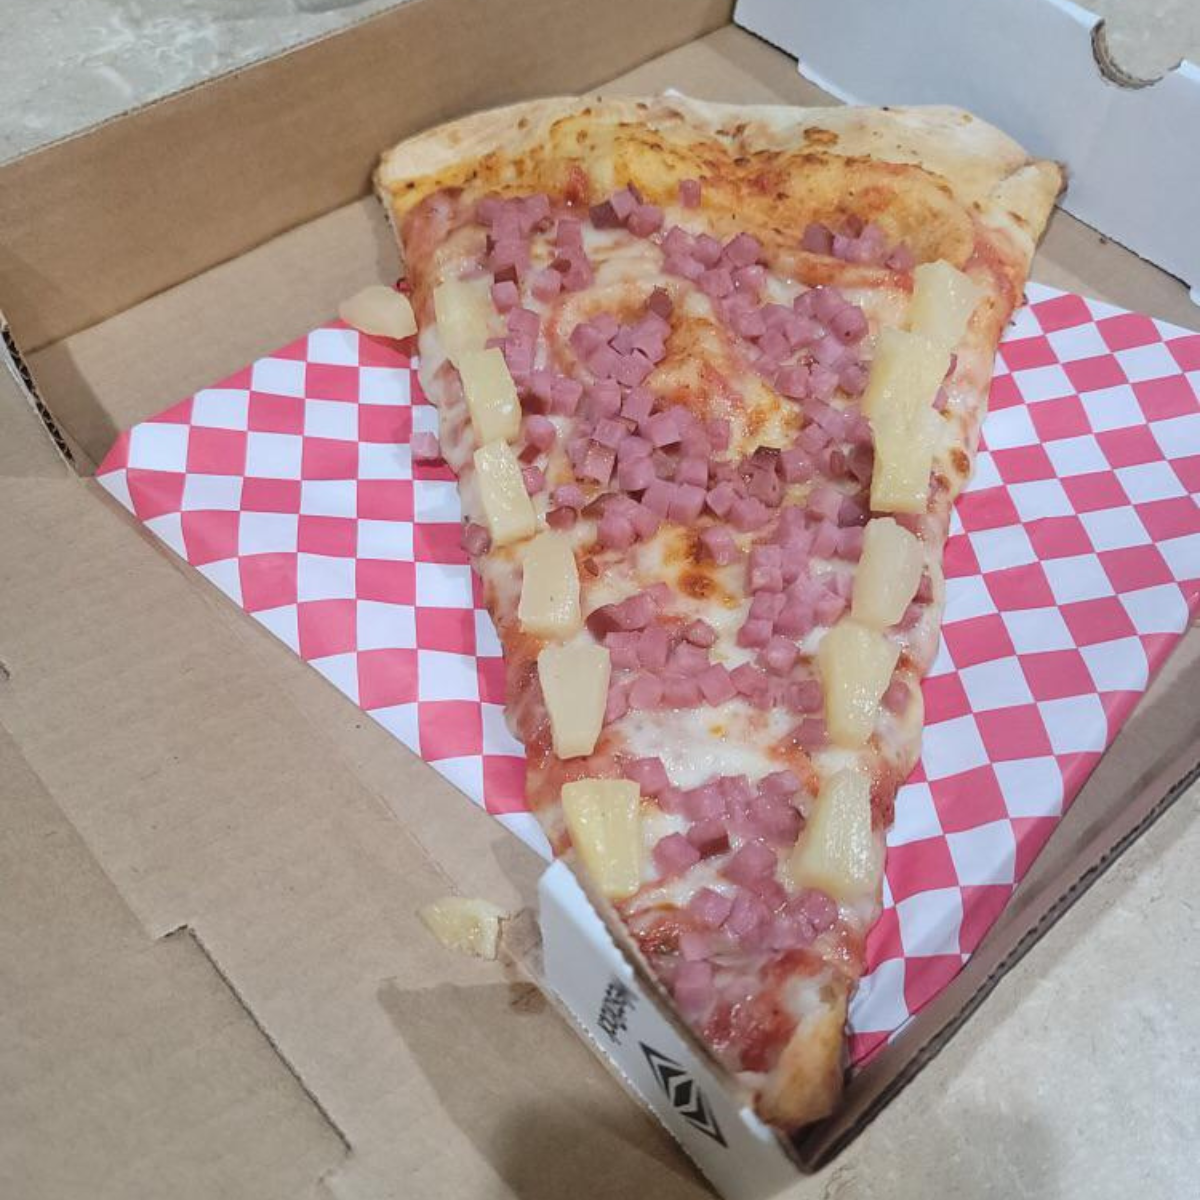 A Hawaiian pizza with a difference.